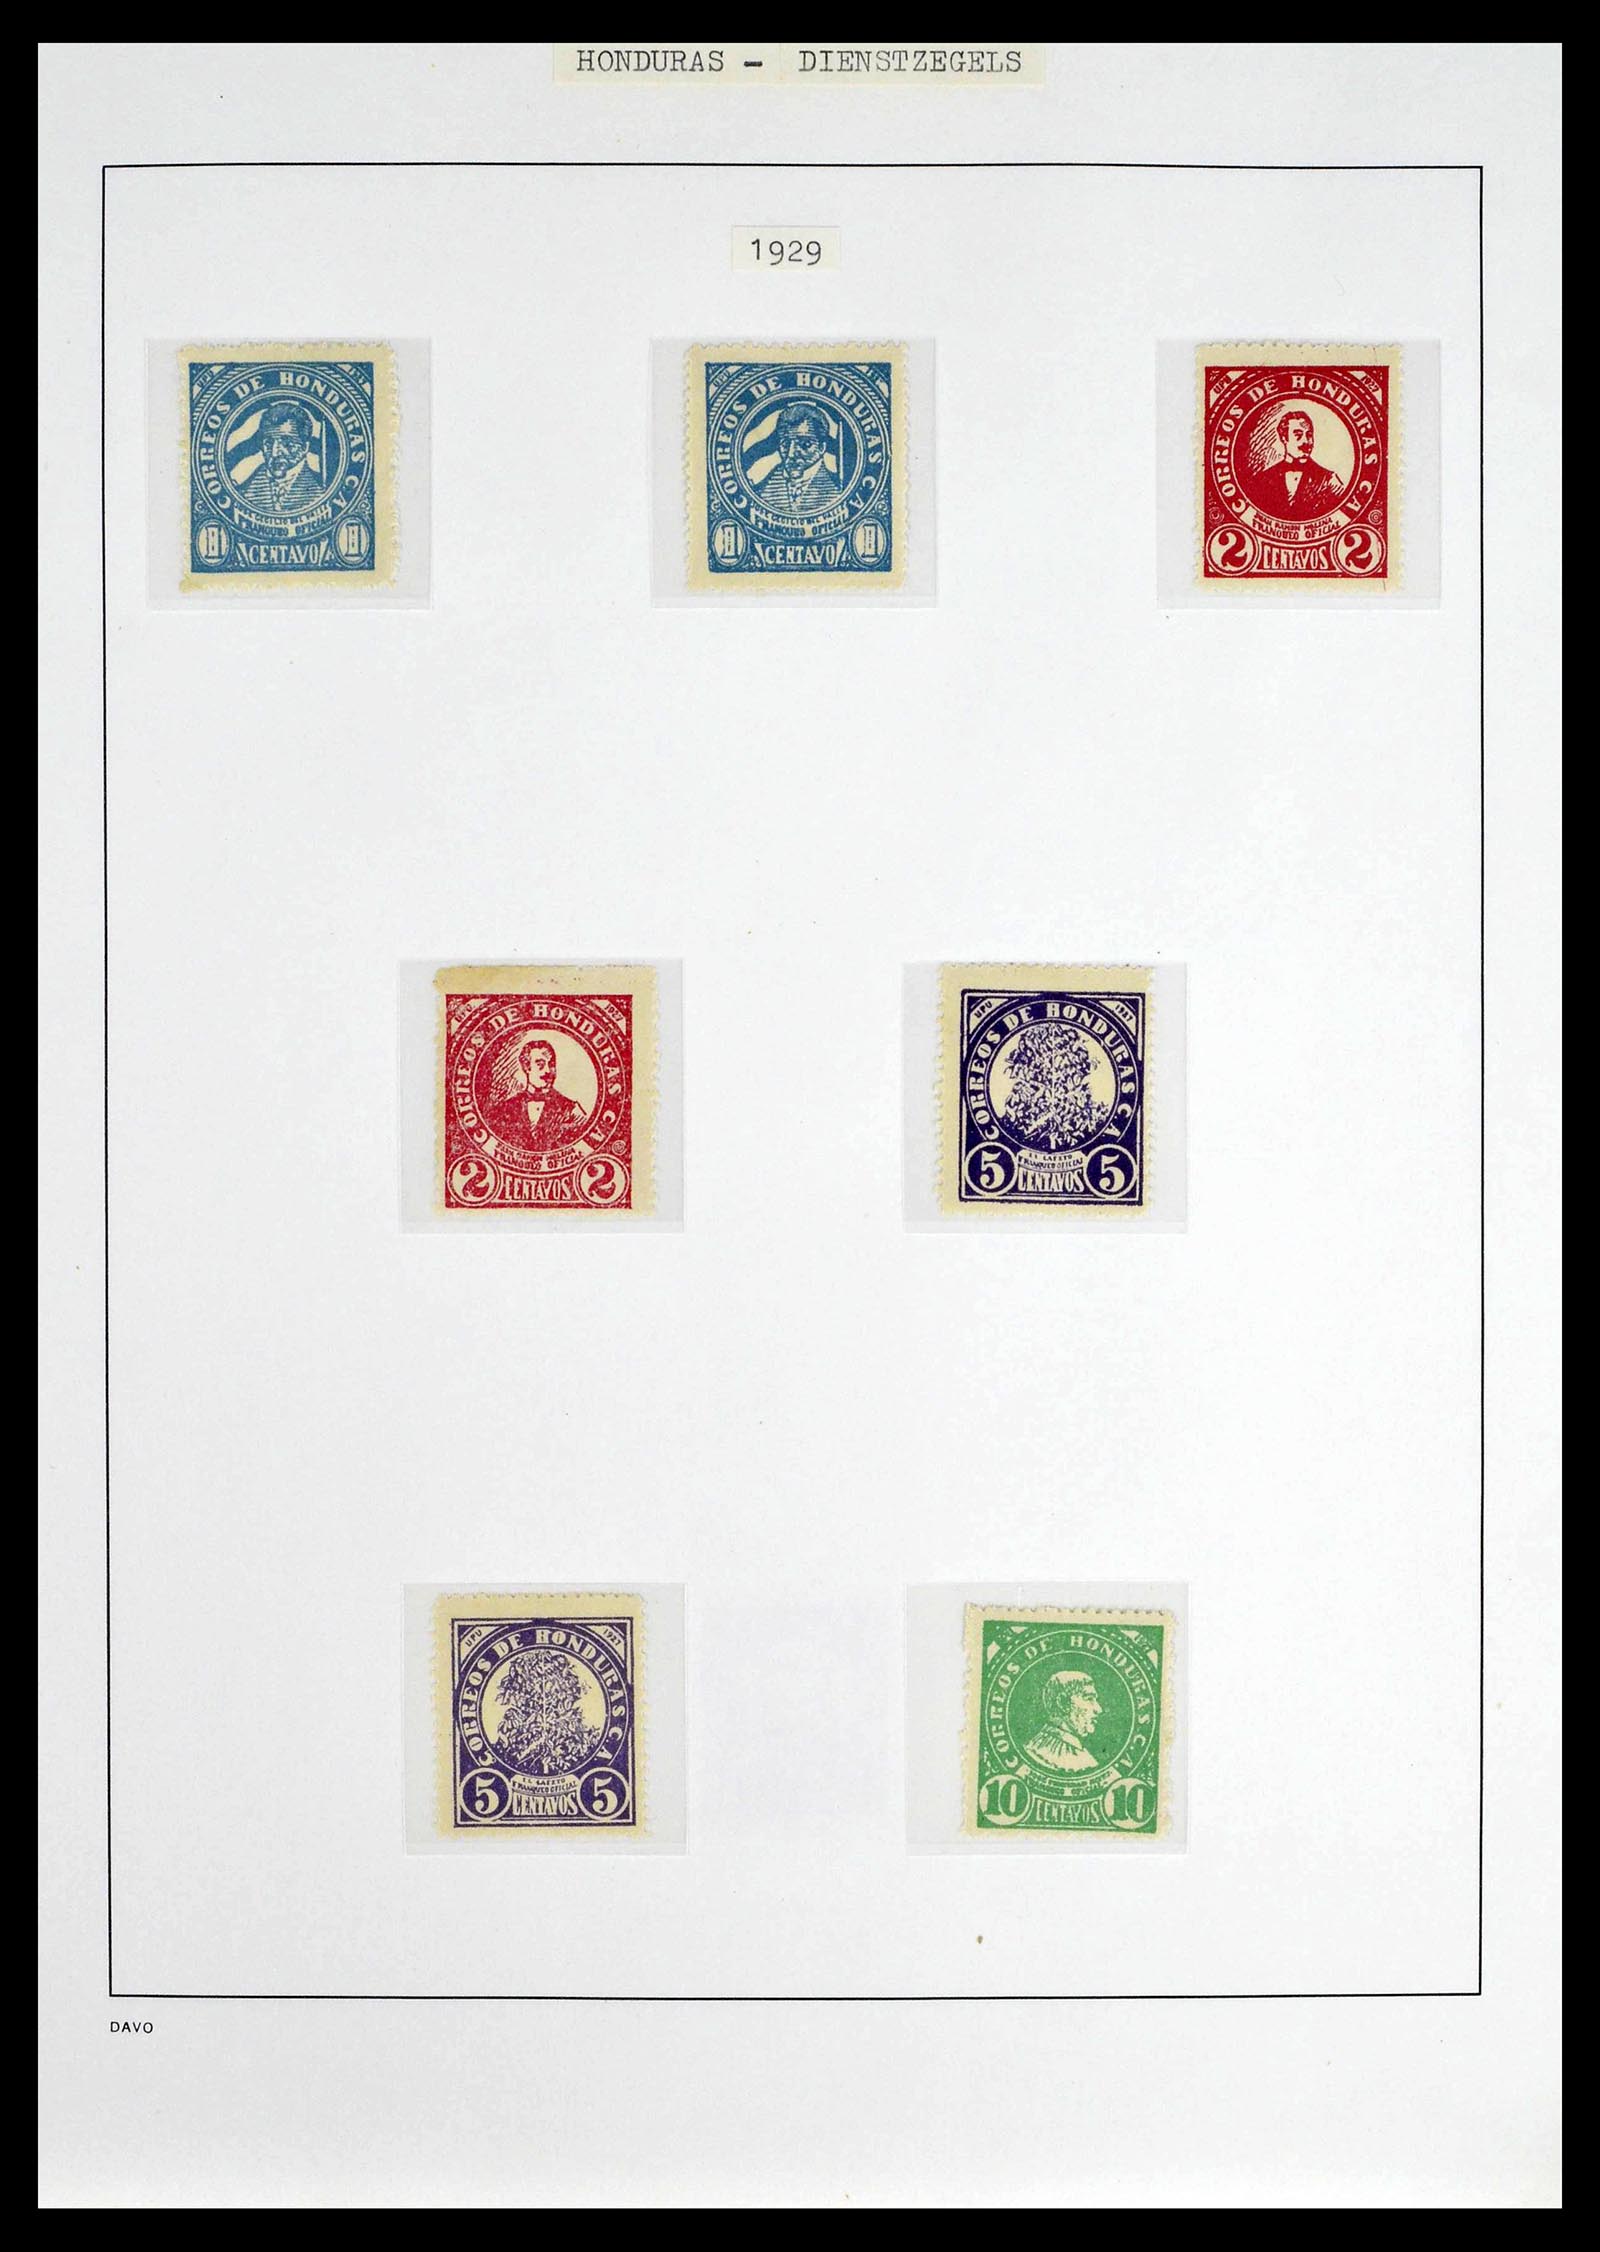 39404 0019 - Stamp collection 39404 Honduras service stamps 1890-1974.